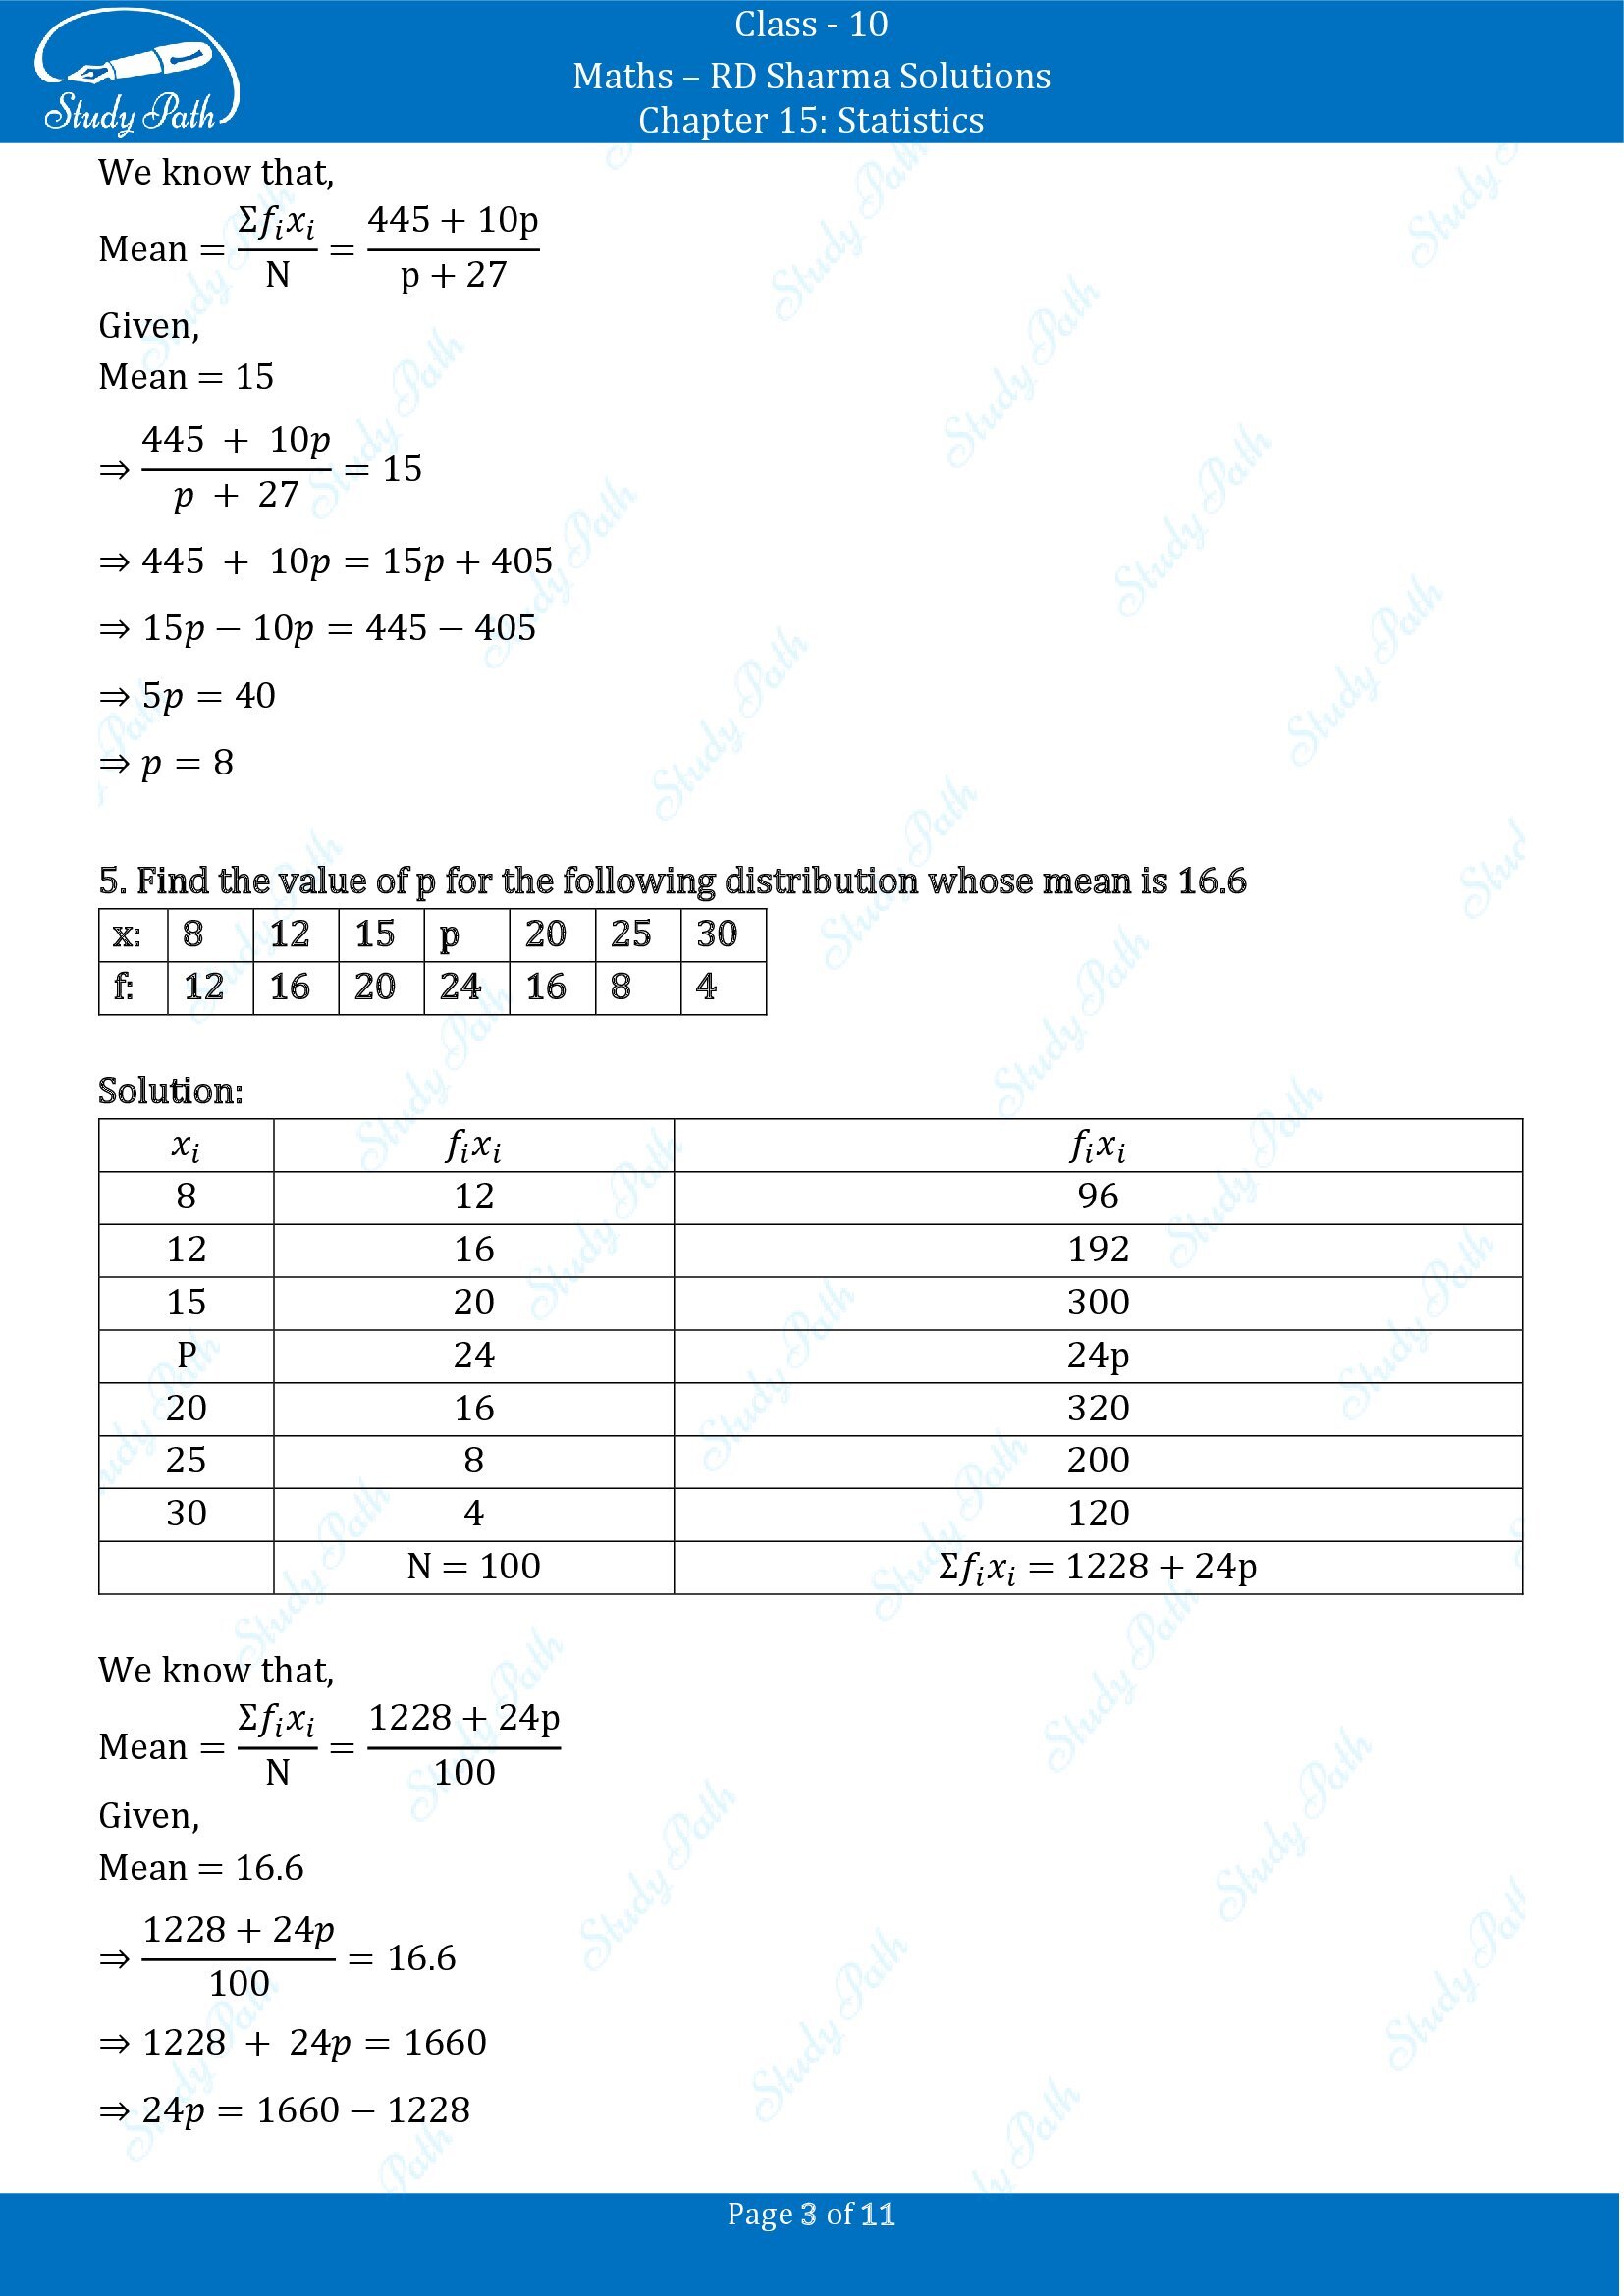 RD Sharma Solutions Class 10 Chapter 15 Statistics Exercise 15.1 00003